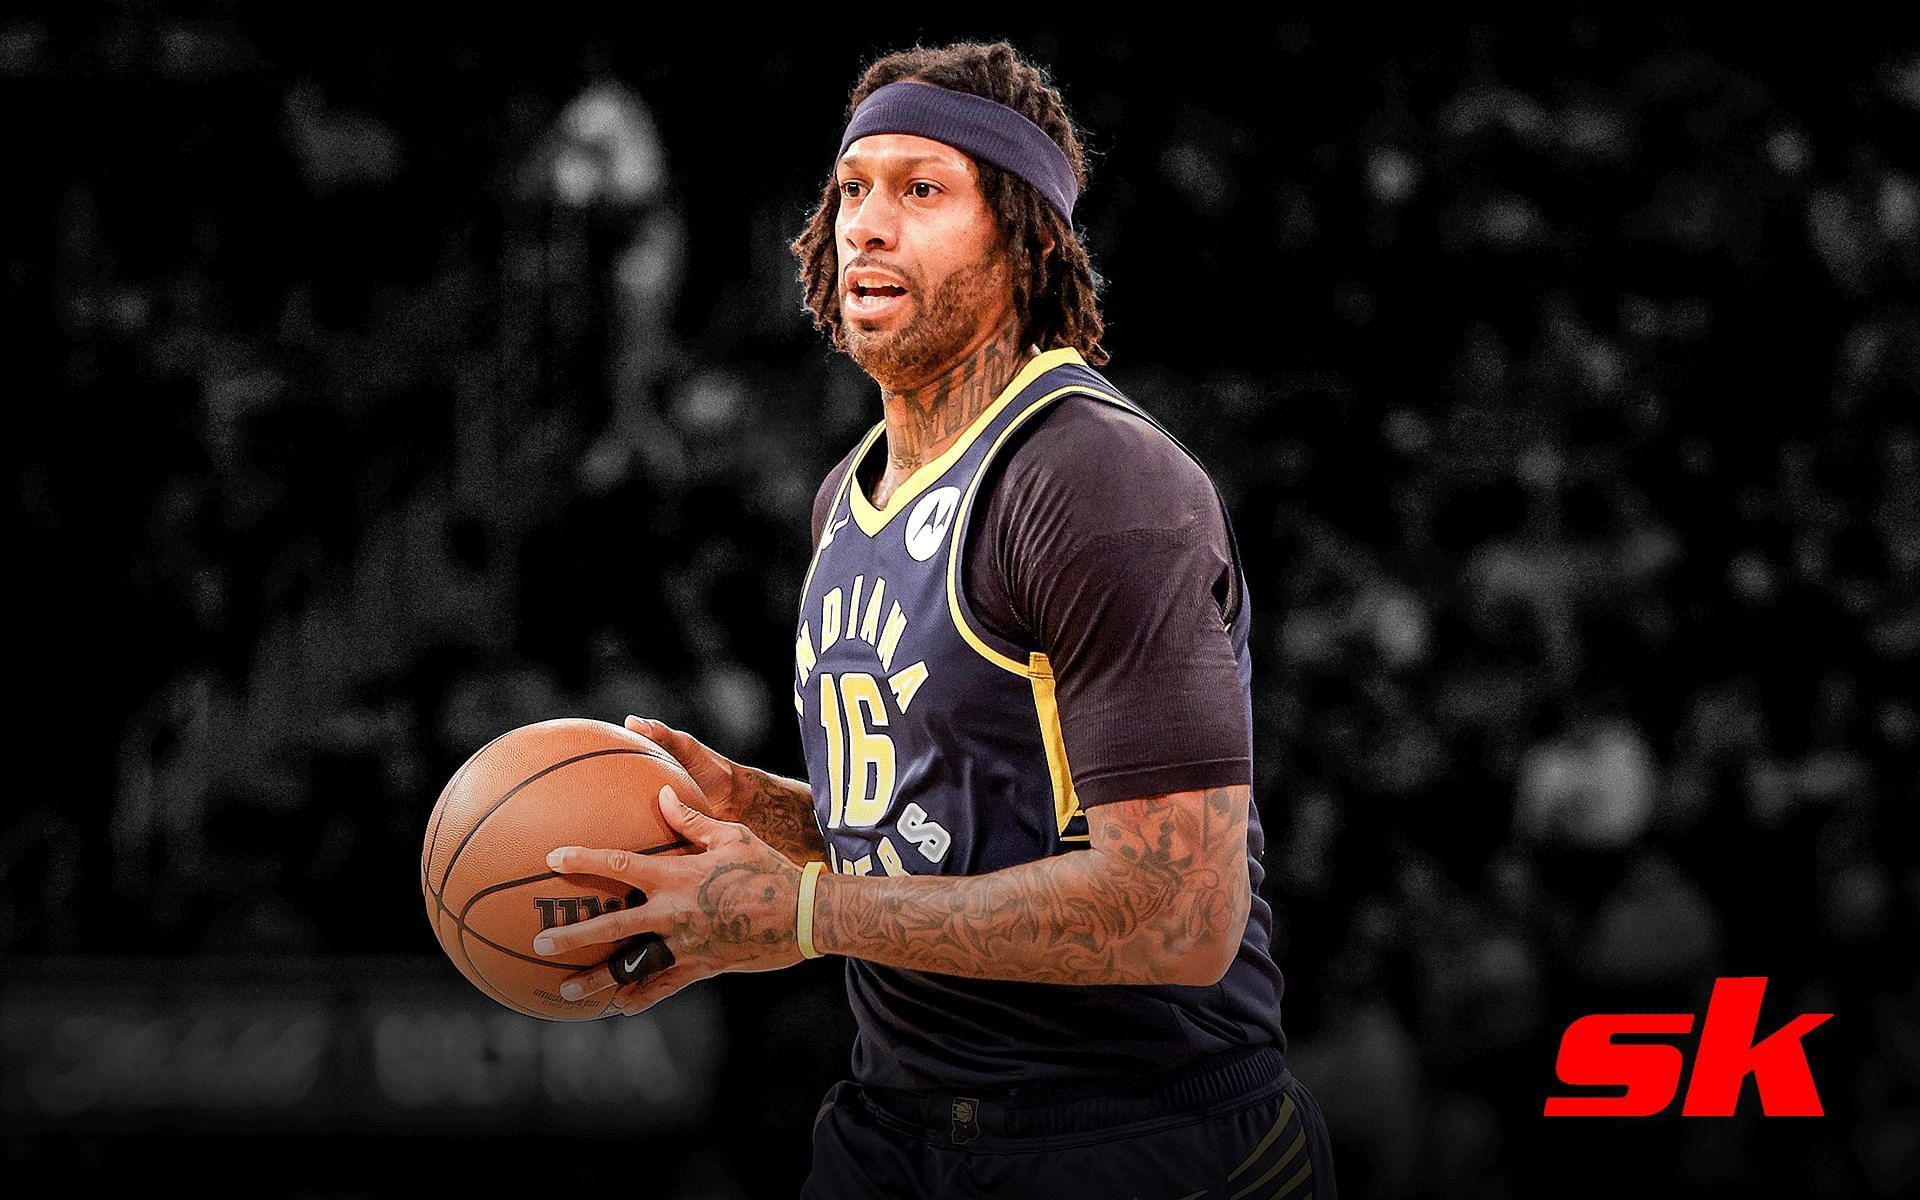 NBA star James Johnson most feared man in the league